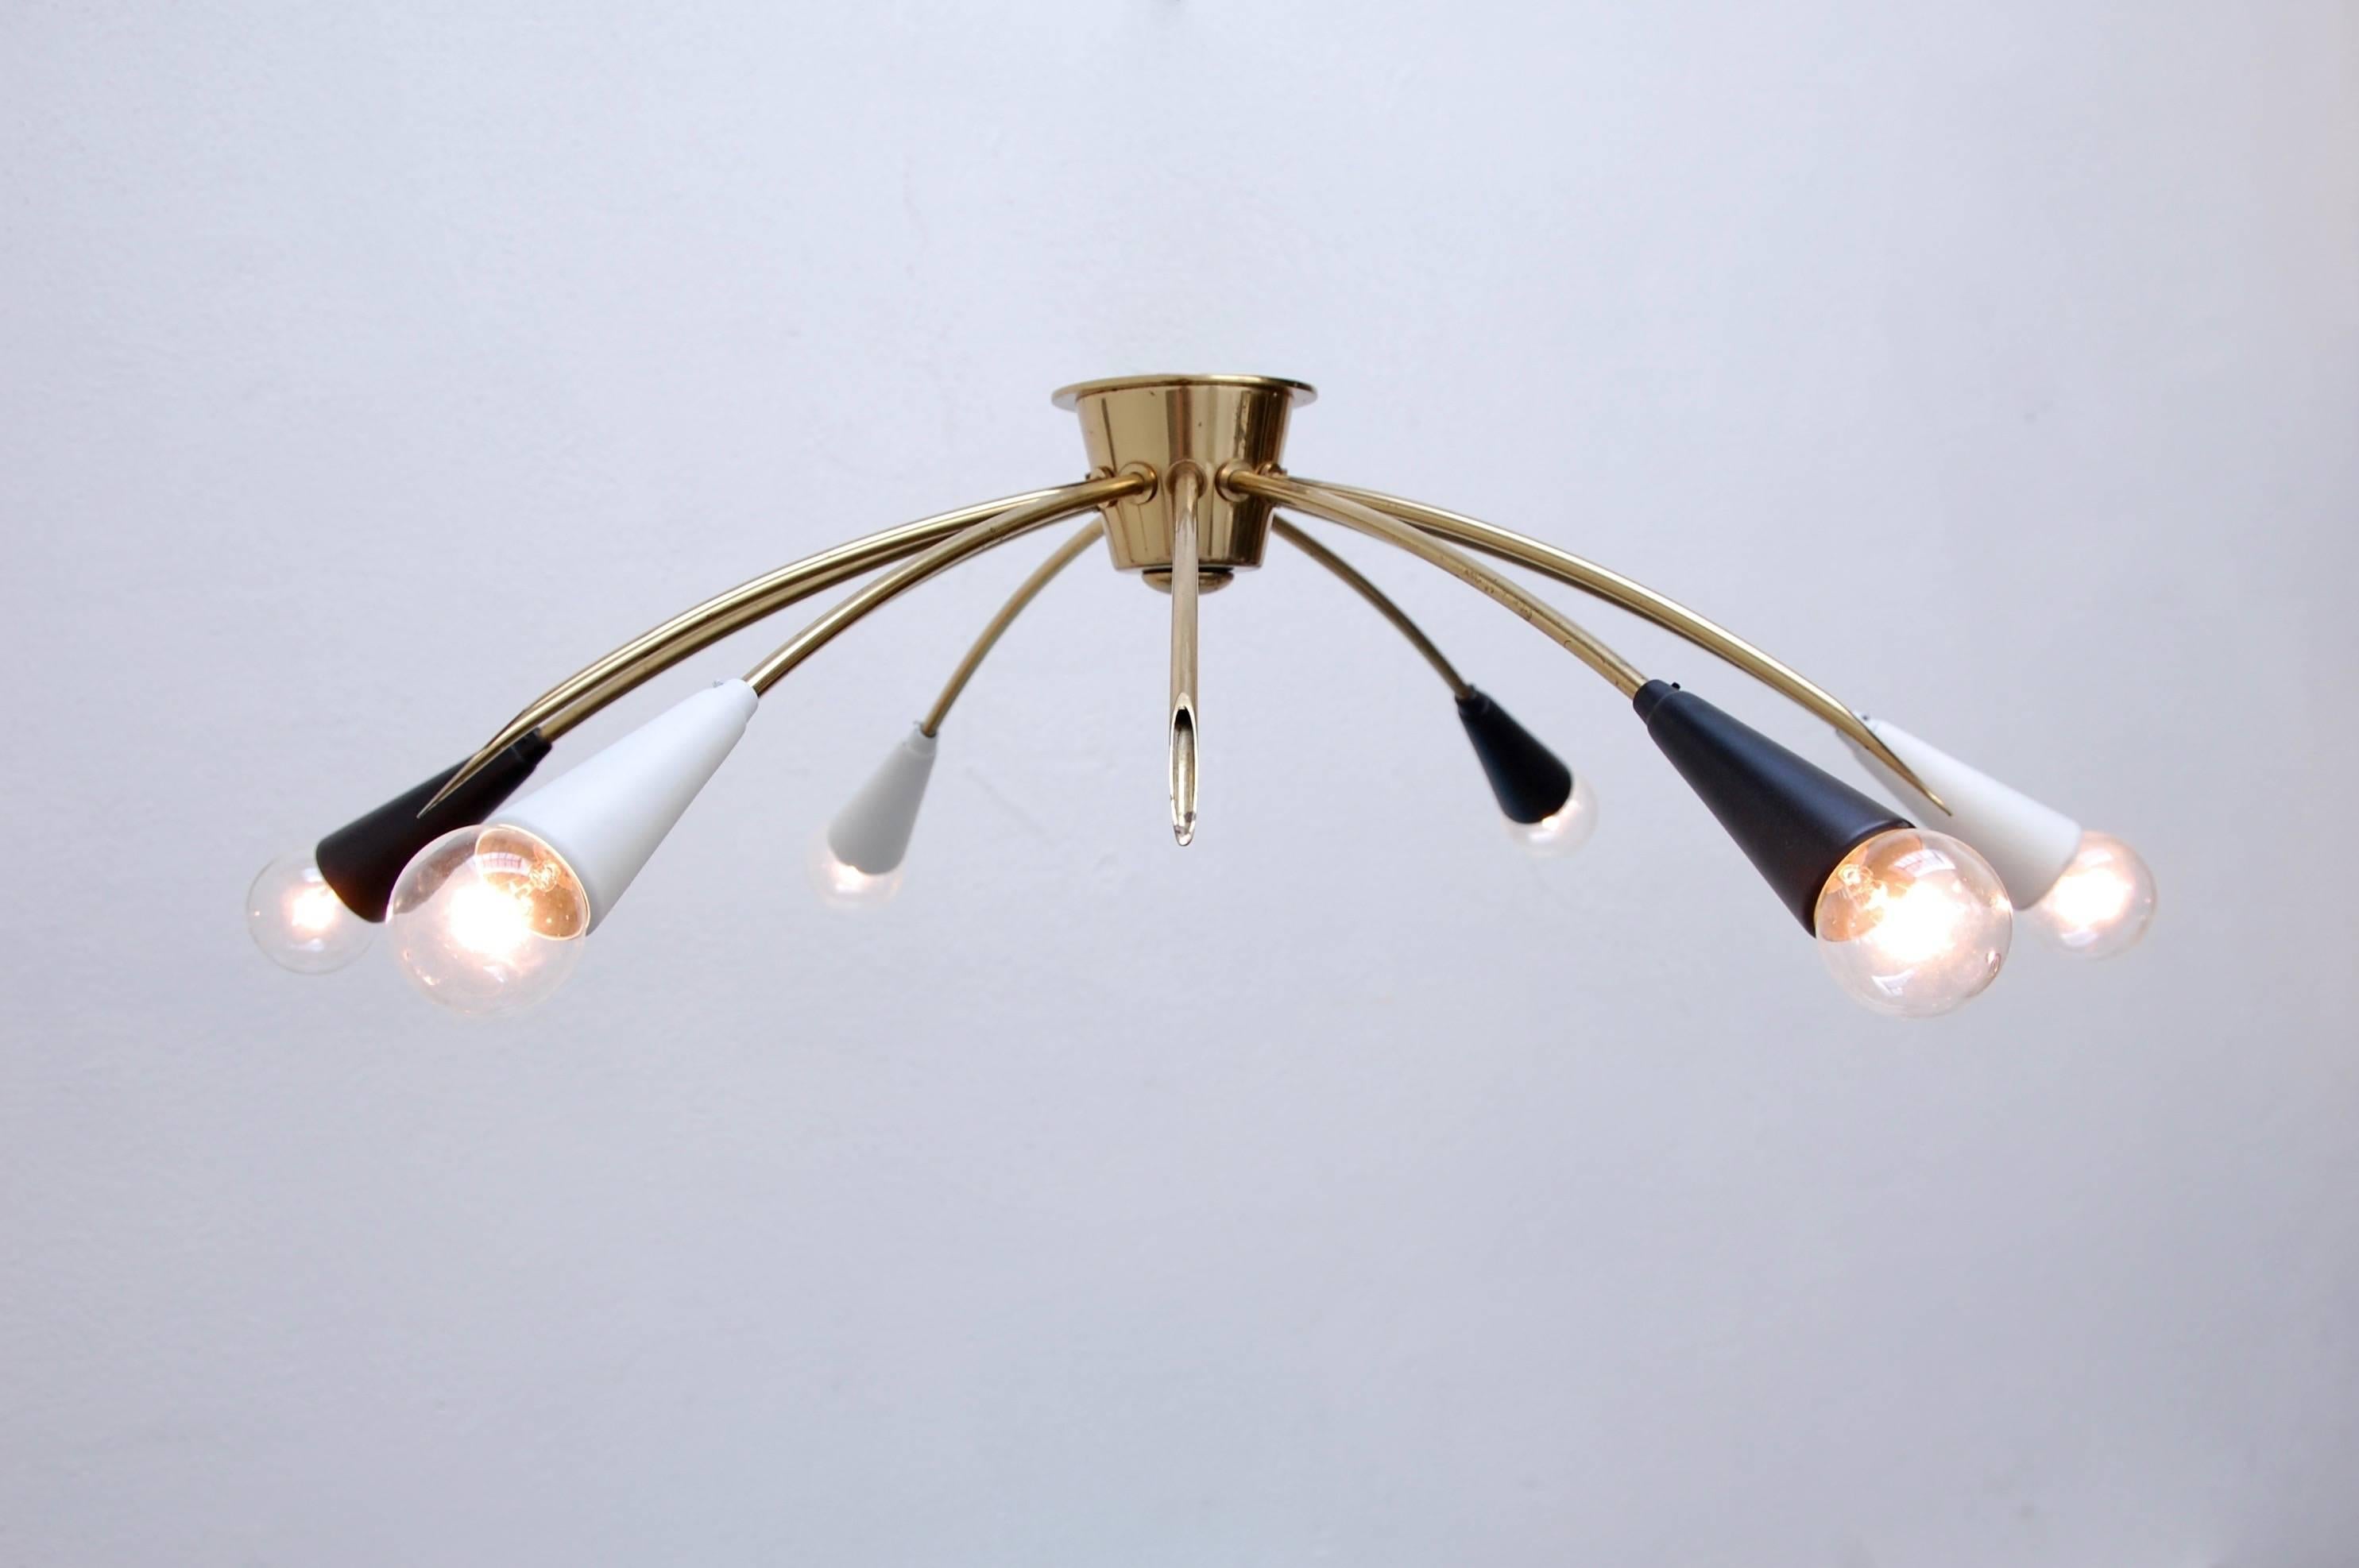 Pristine modern flush mount fixture from 1950s Germany in brass and two-tone painted aluminum. Partially restored, original socket covers, six E12 Candelabra based light sockets, rewired for use in the US.

We at Lumfardo Luminaires do all the